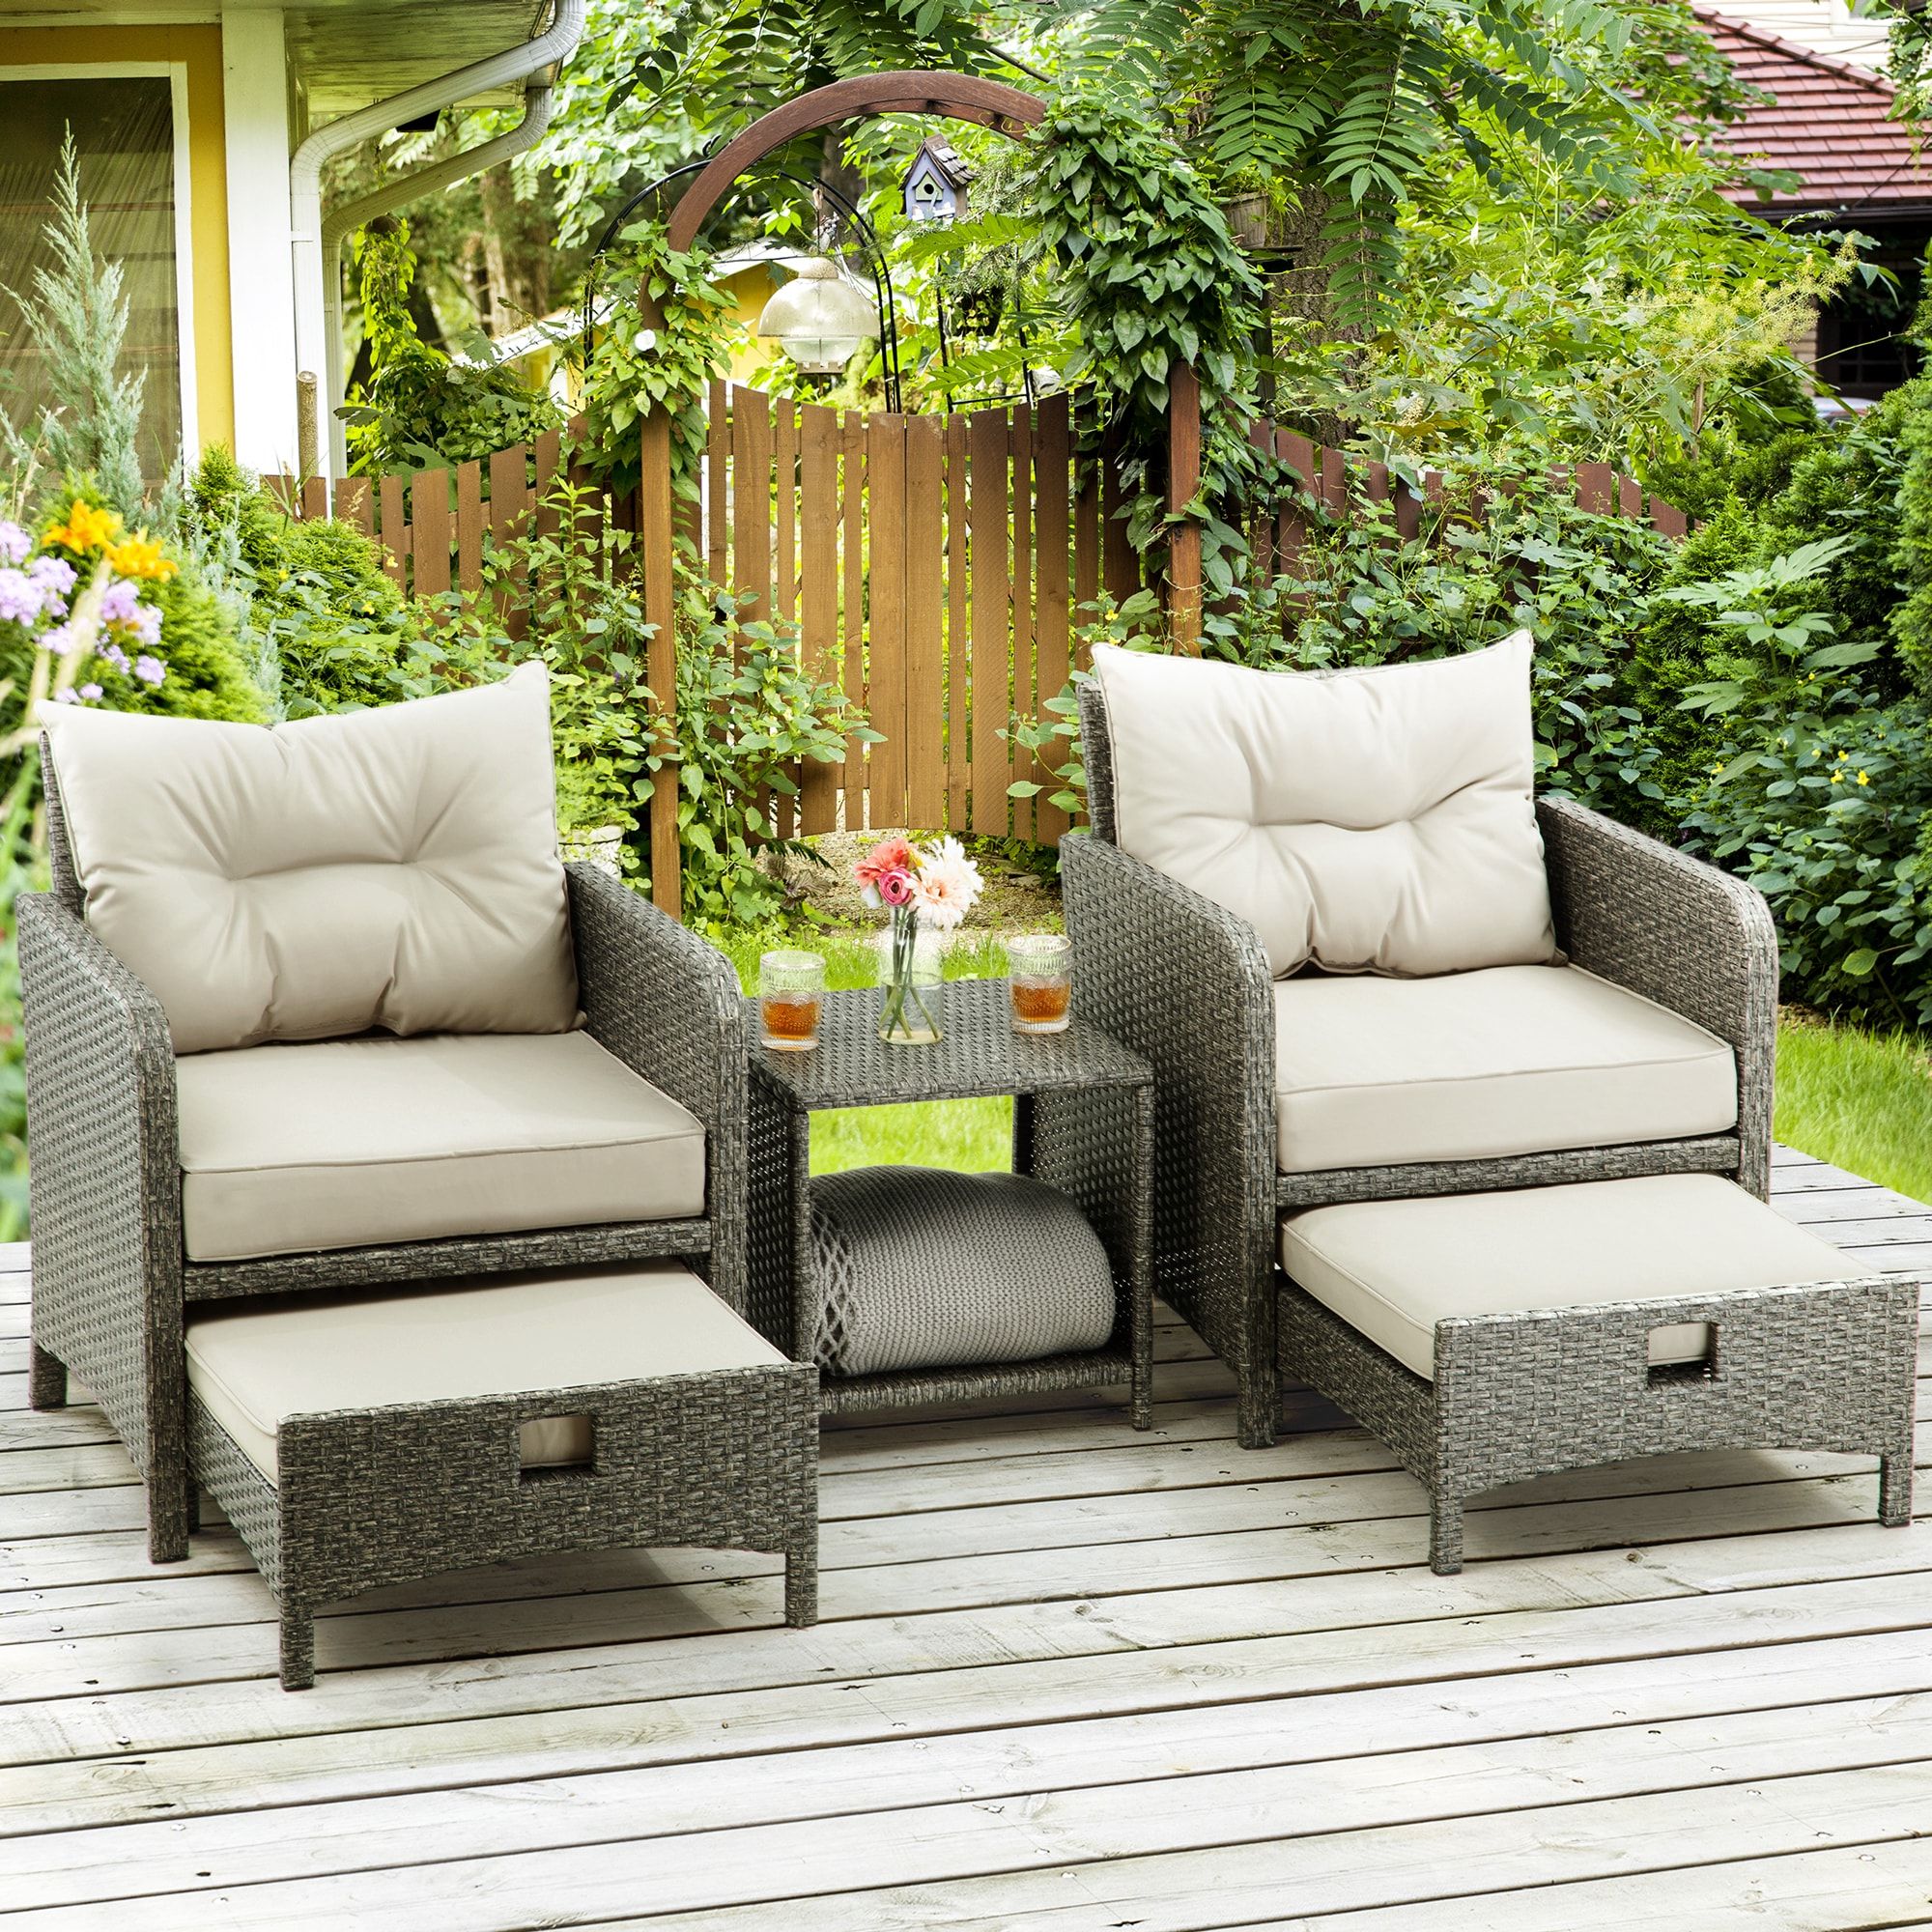 5 Piece Patio Furniture Set Regarding Current 5 Piece Patio Conversation Set 5 Piece Wicker Patio Conversation Set With  Gray Pamapic Cushions In The Patio Conversation Sets Department At Lowes (Photo 3 of 15)